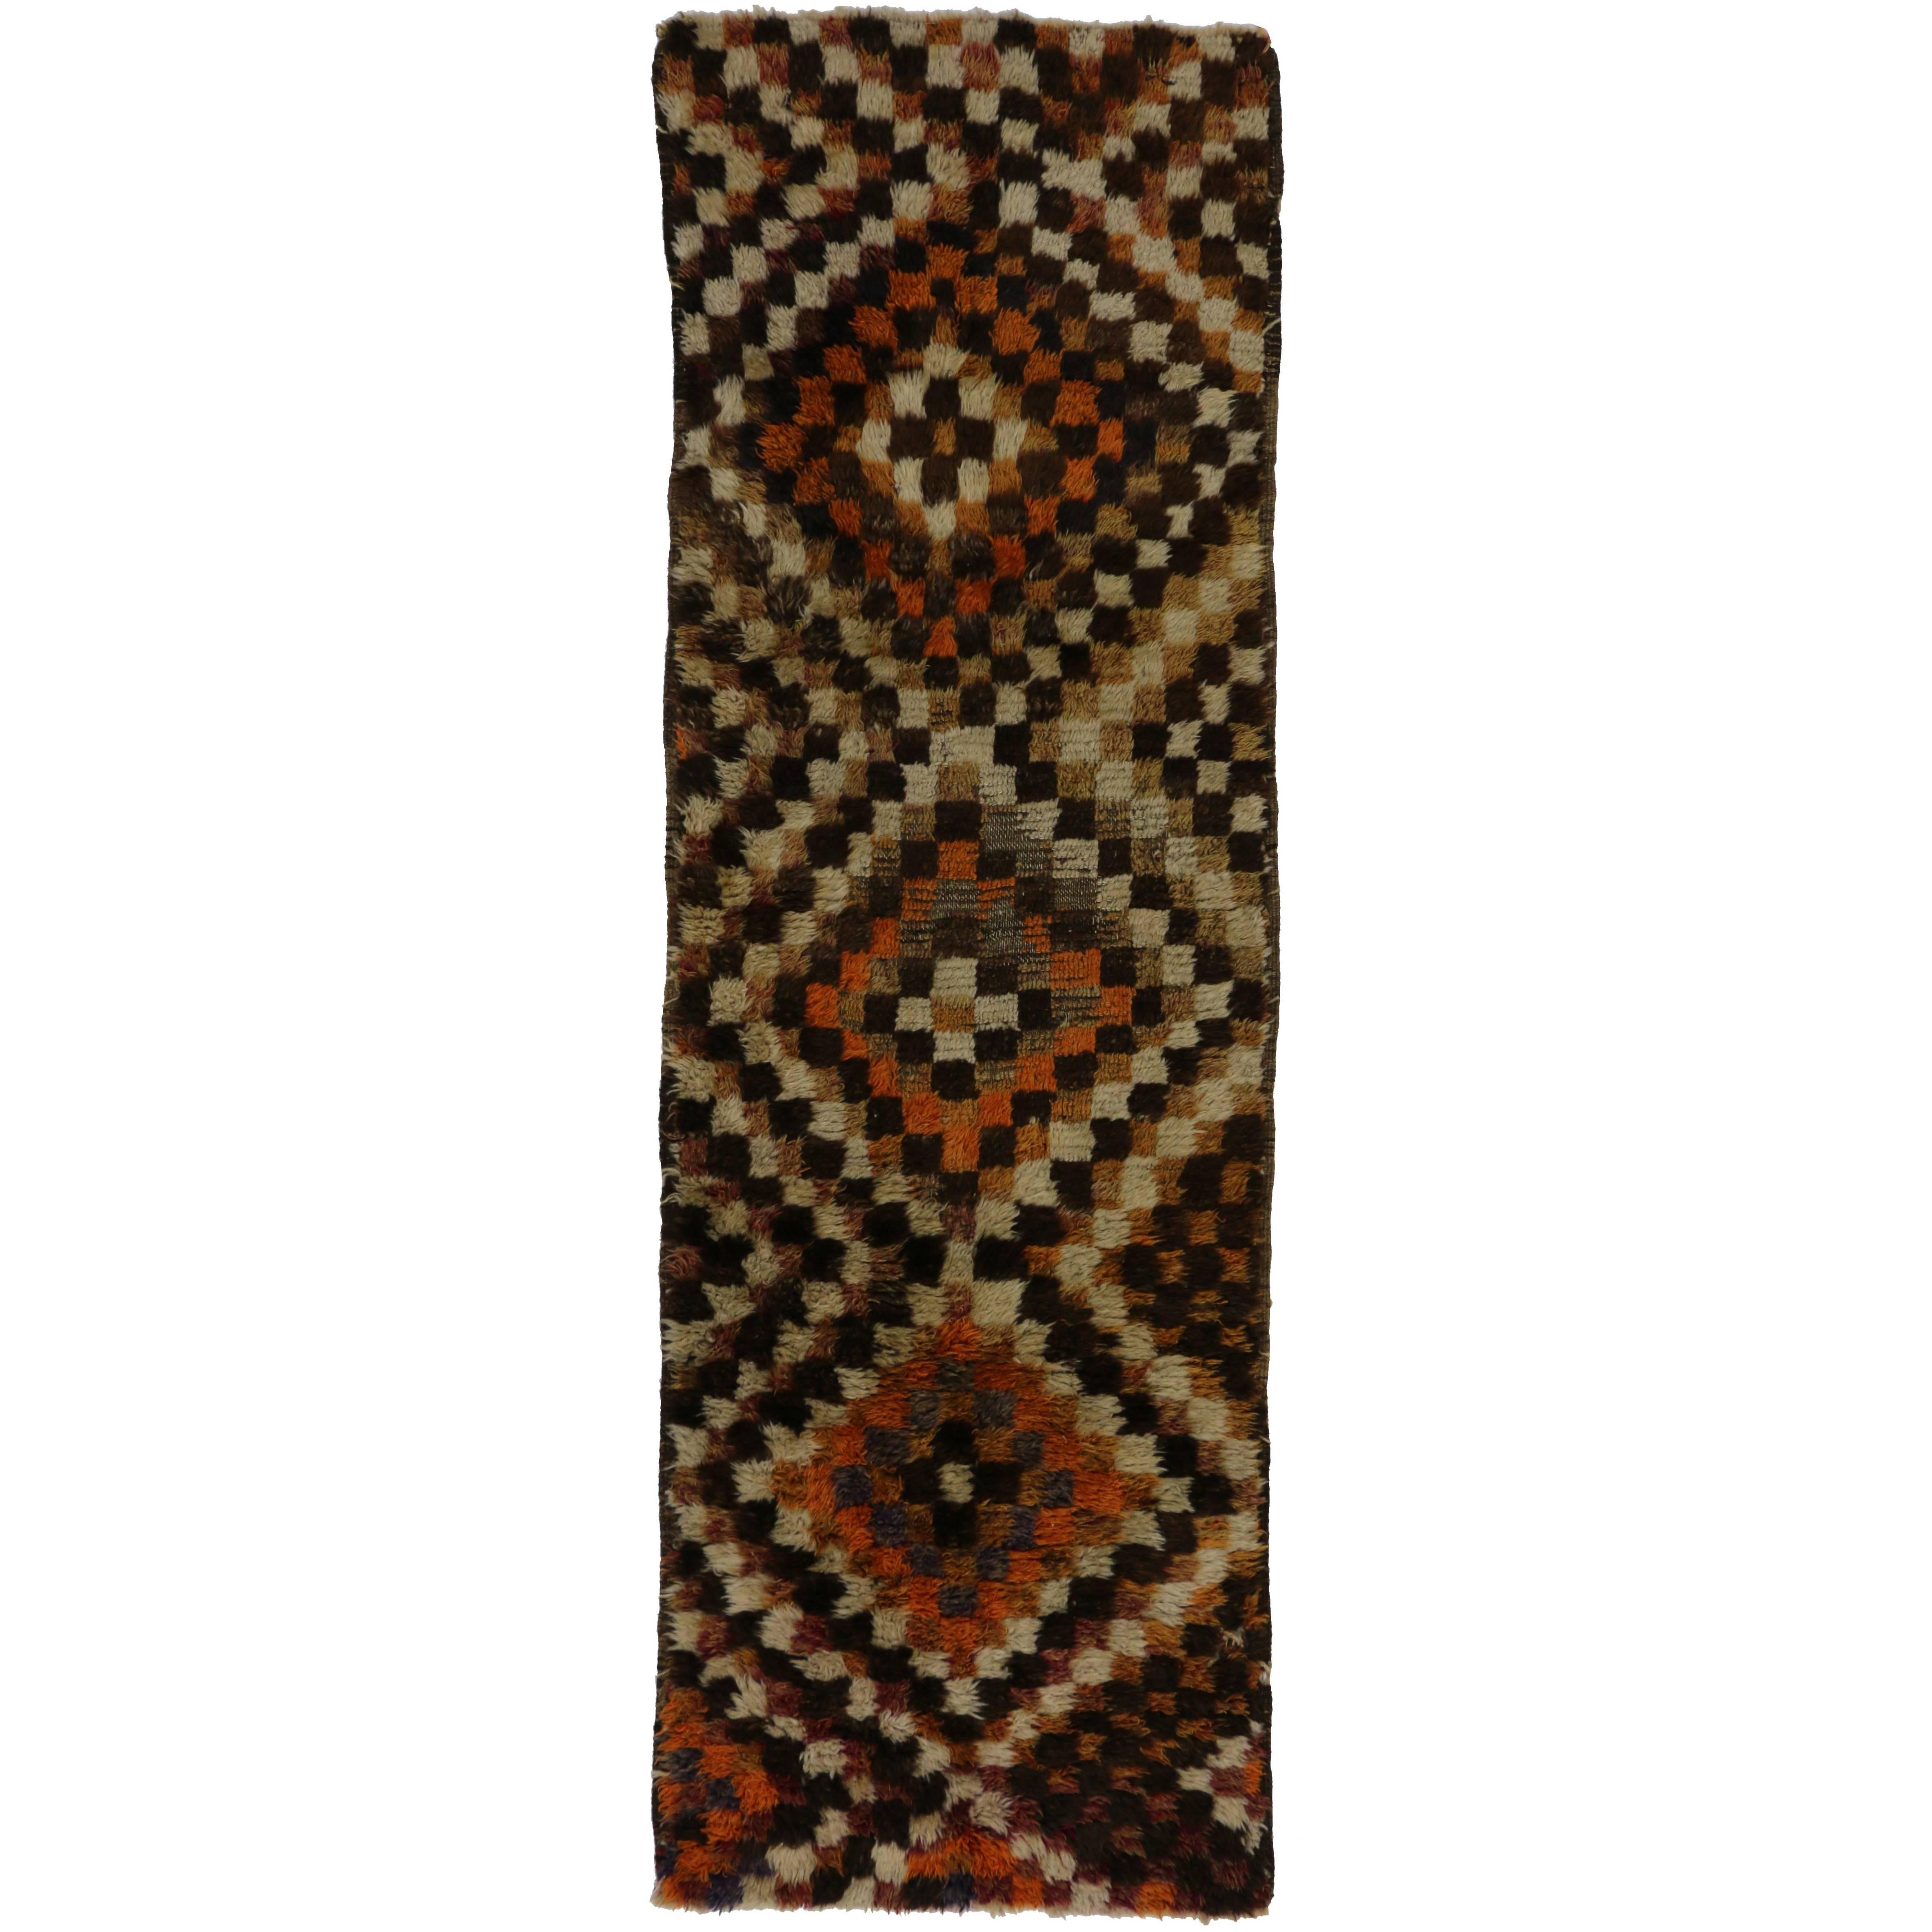 Vintage Turkish Tulu Runner with Checker Pattern and Bauhaus Cubism Style